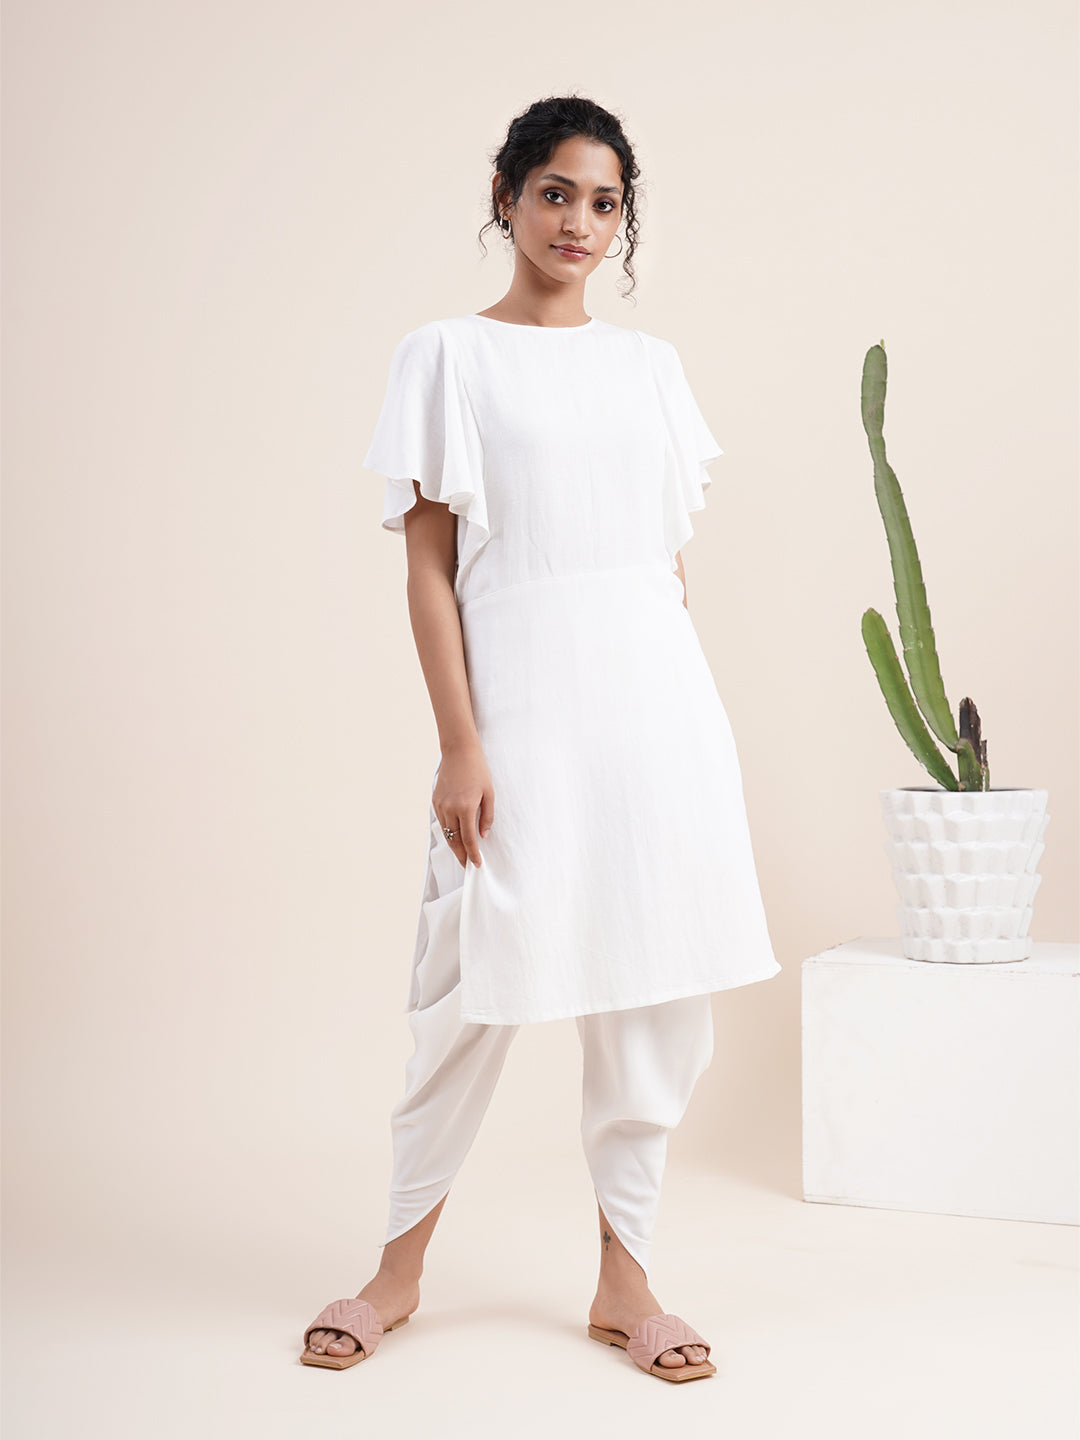 Marshmallow White Butterfly sleeved kurta in rayon flax